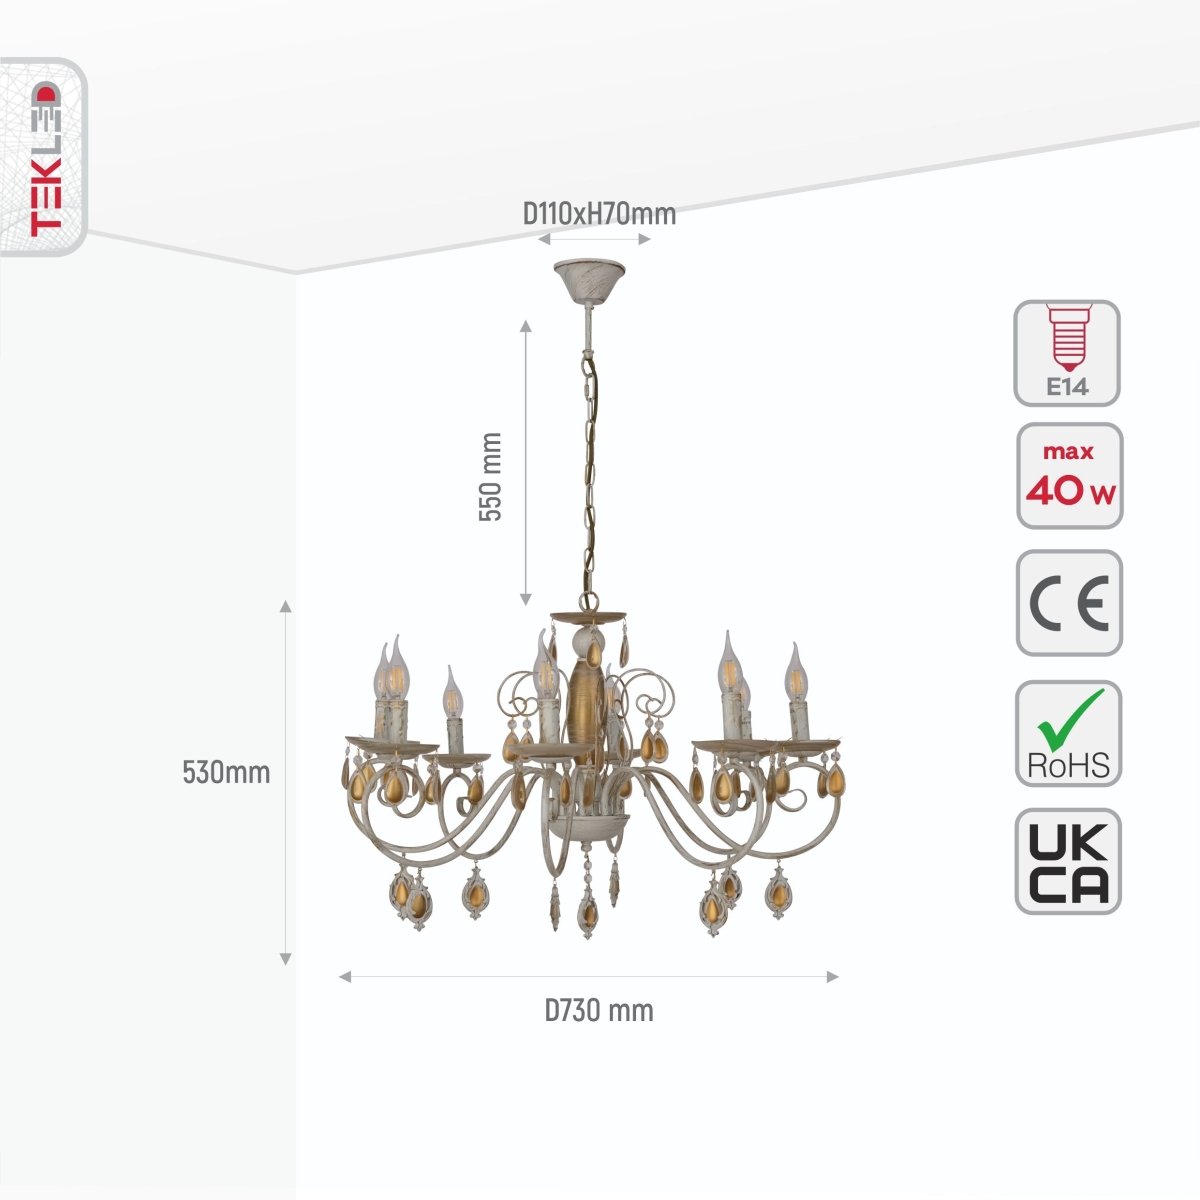 Size and specs of Amber Crystal Gold and White Metal 8 Arm Chandelier with E14 Fitting | TEKLED 158-19444